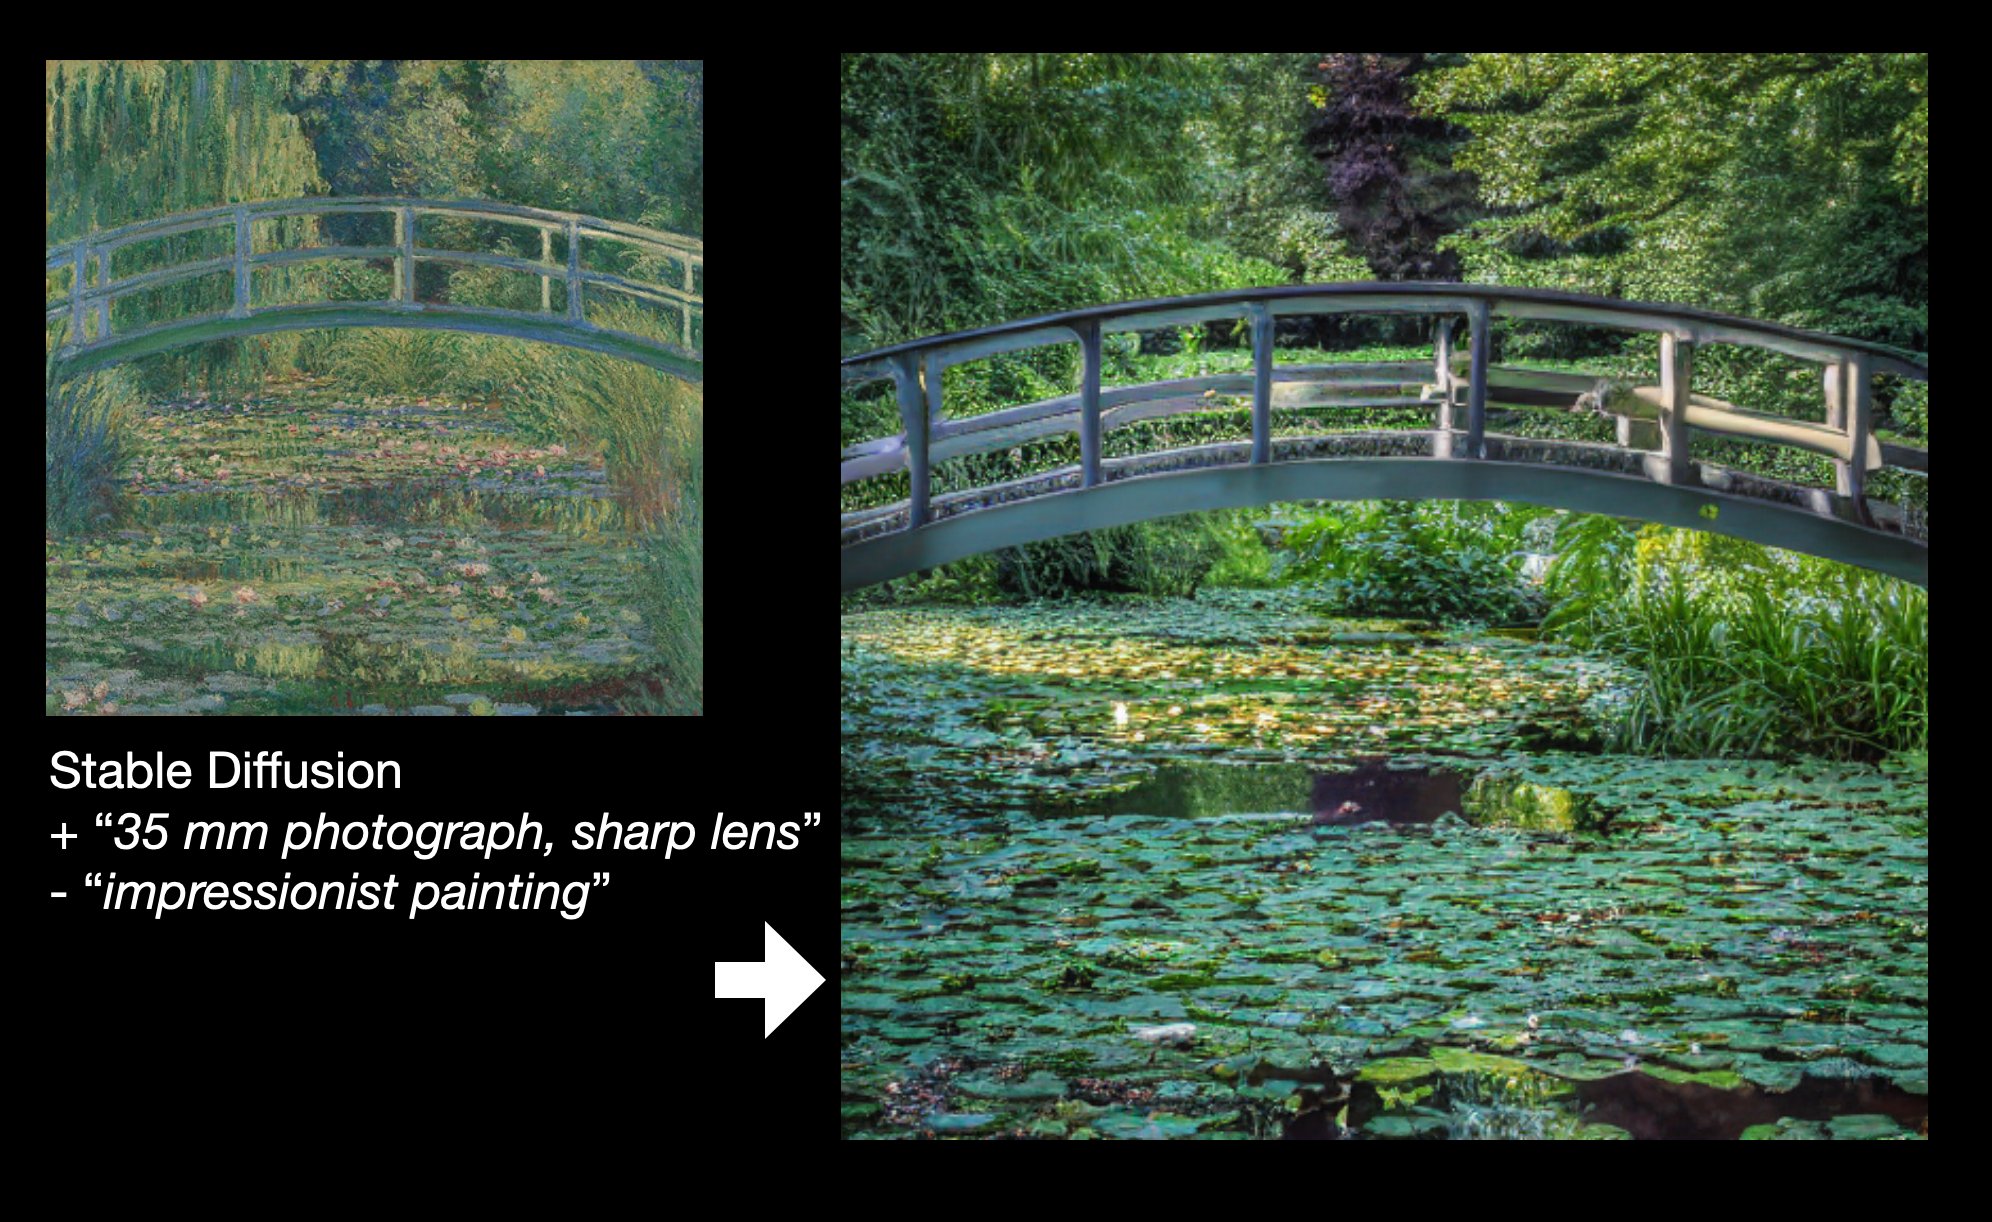 Monet painting of a japanese bridge, processed into a photorealistic image, caption: Stable Diffusion + "35 mm photograph, sharp lens", - "impressionist painting"